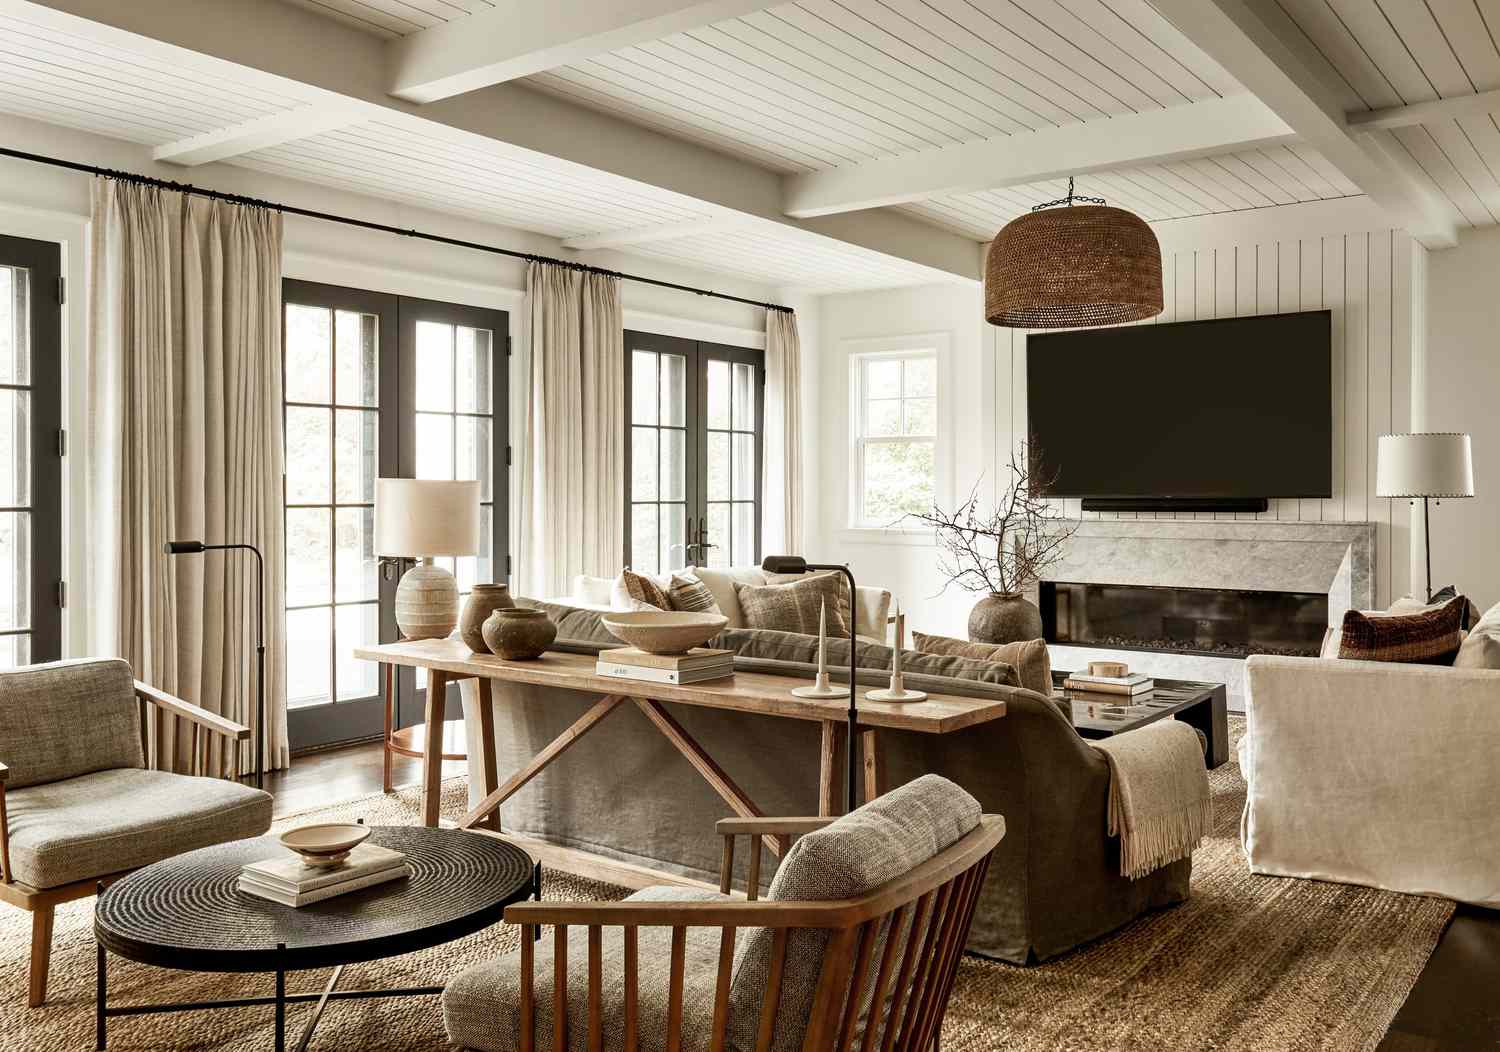 Rustic & Farmhouse Lighting: A Trend That’s Here to Stay